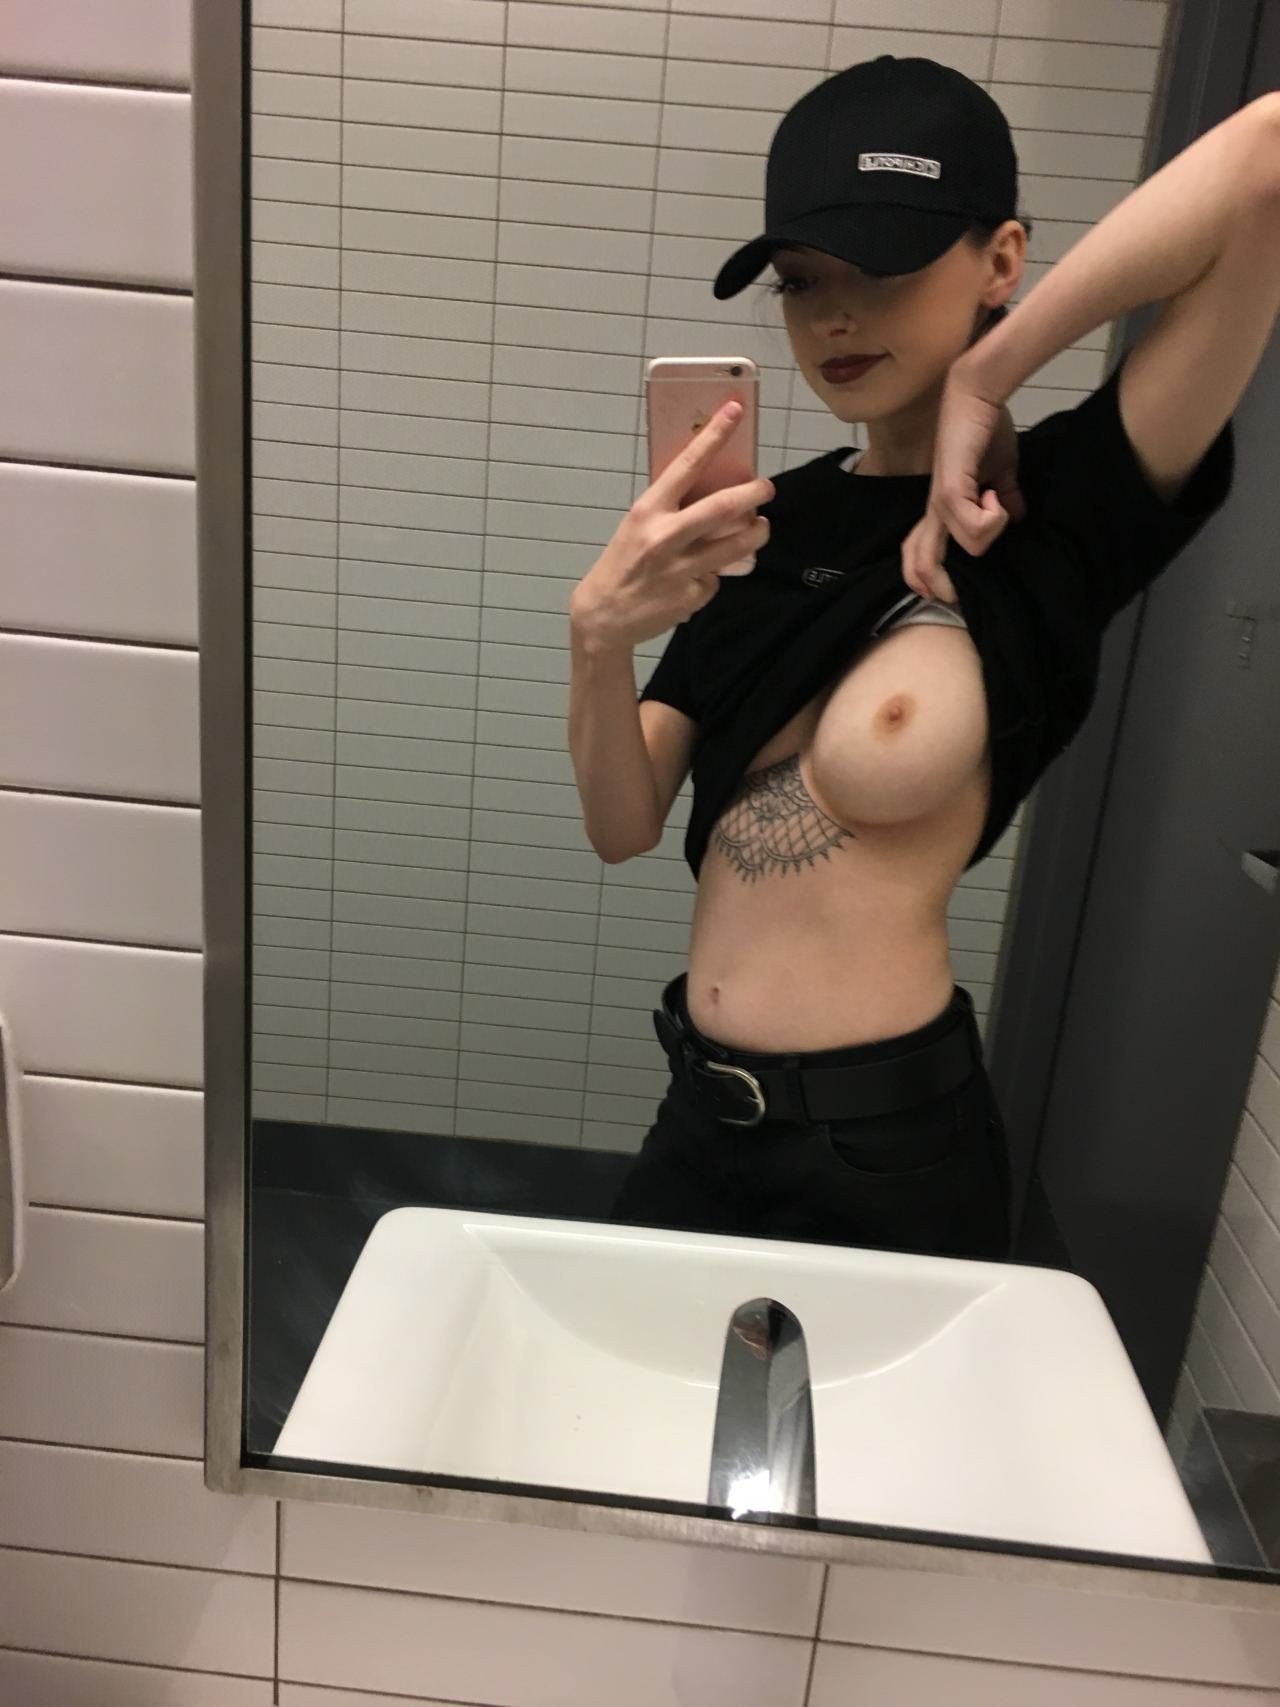 Shared Photo by Hornyasf2715 with the username @Hornyasf2715,  April 15, 2024 at 8:15 AM. The post is about the topic RC's Mirror Selfies and the text says '#MirrorSelfie #Naughty #Cutie #GfMaterial #Selfie'